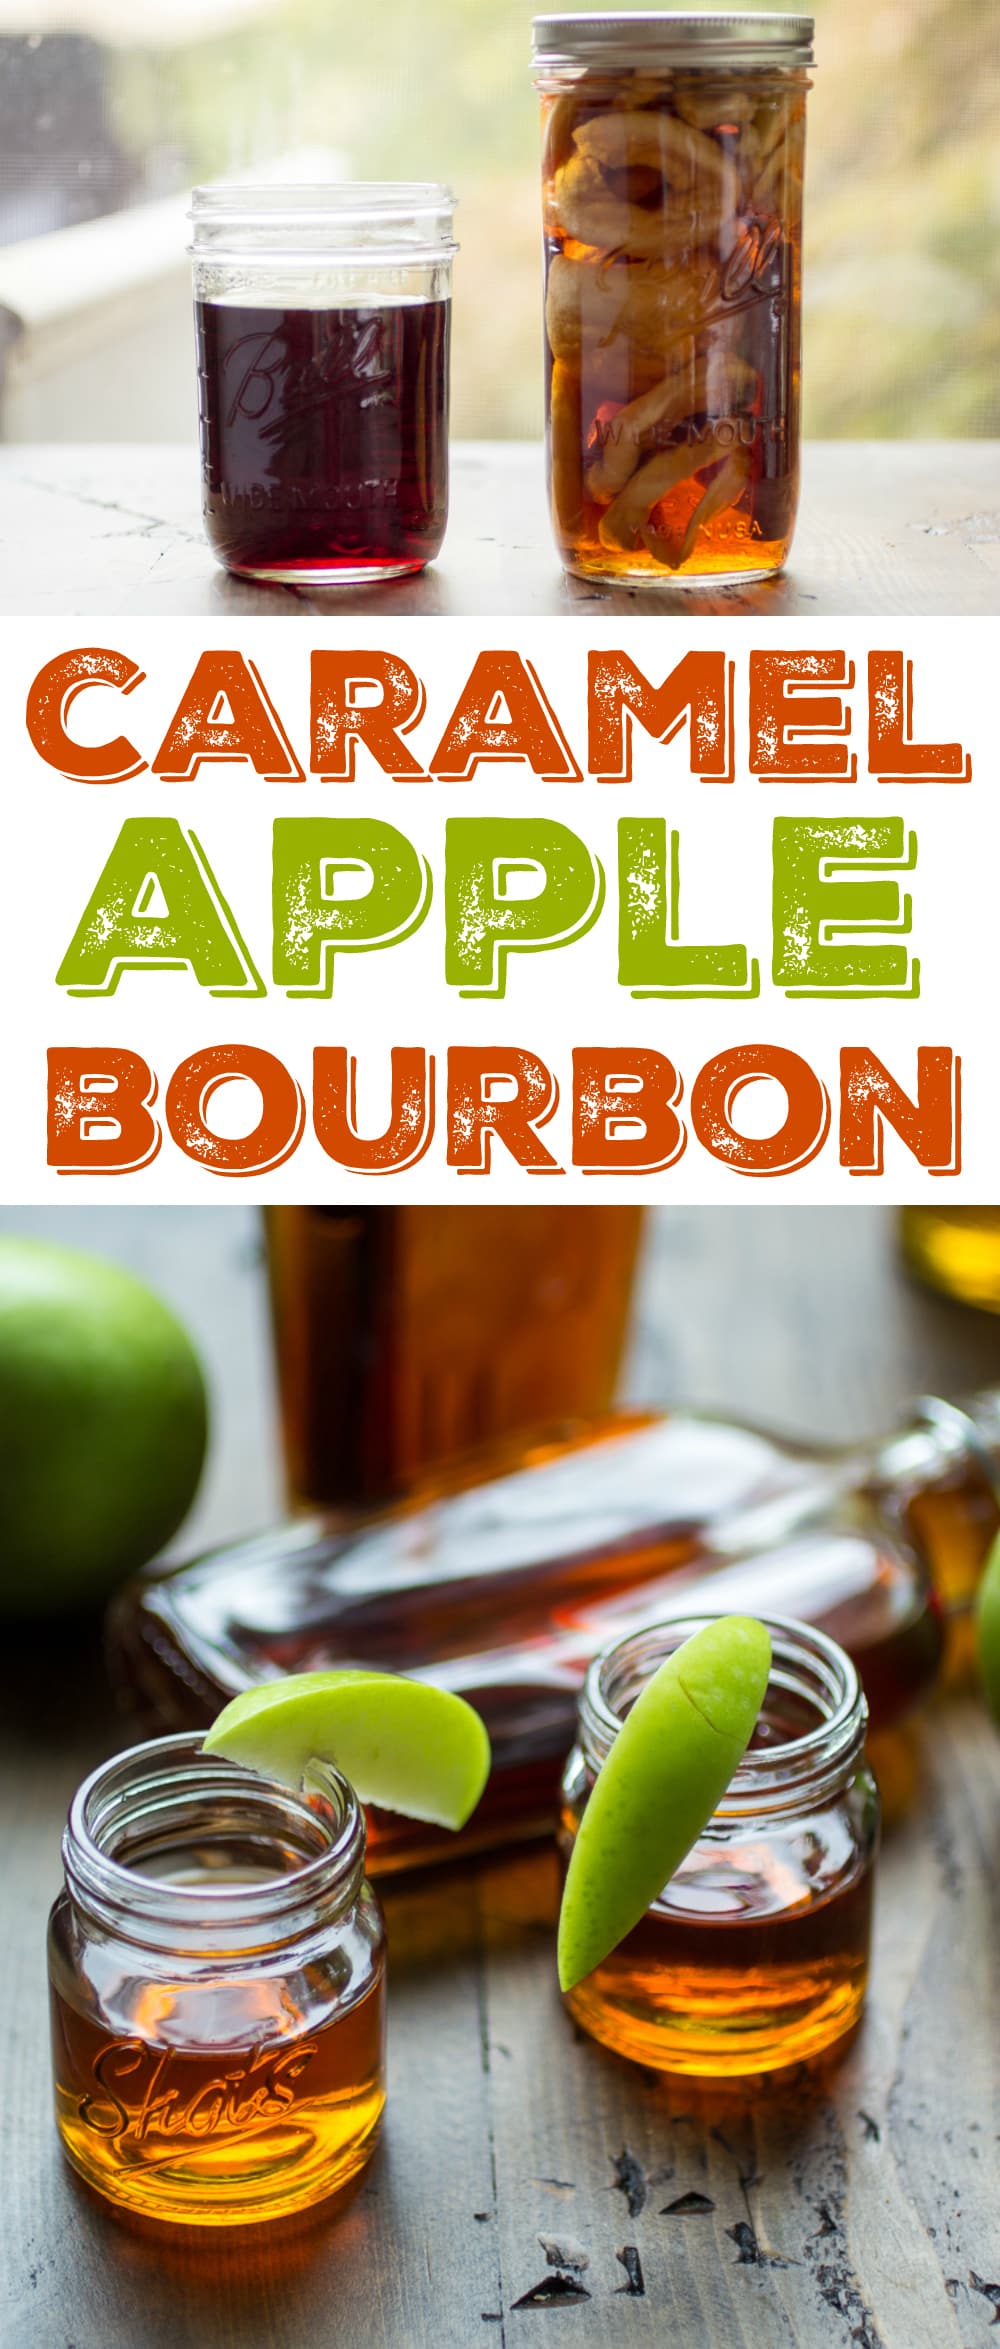 A sip of Caramel Apple Bourbon is like a sip of everything autumn! Bring a flask to the bonfire and soak up the best of the season. 